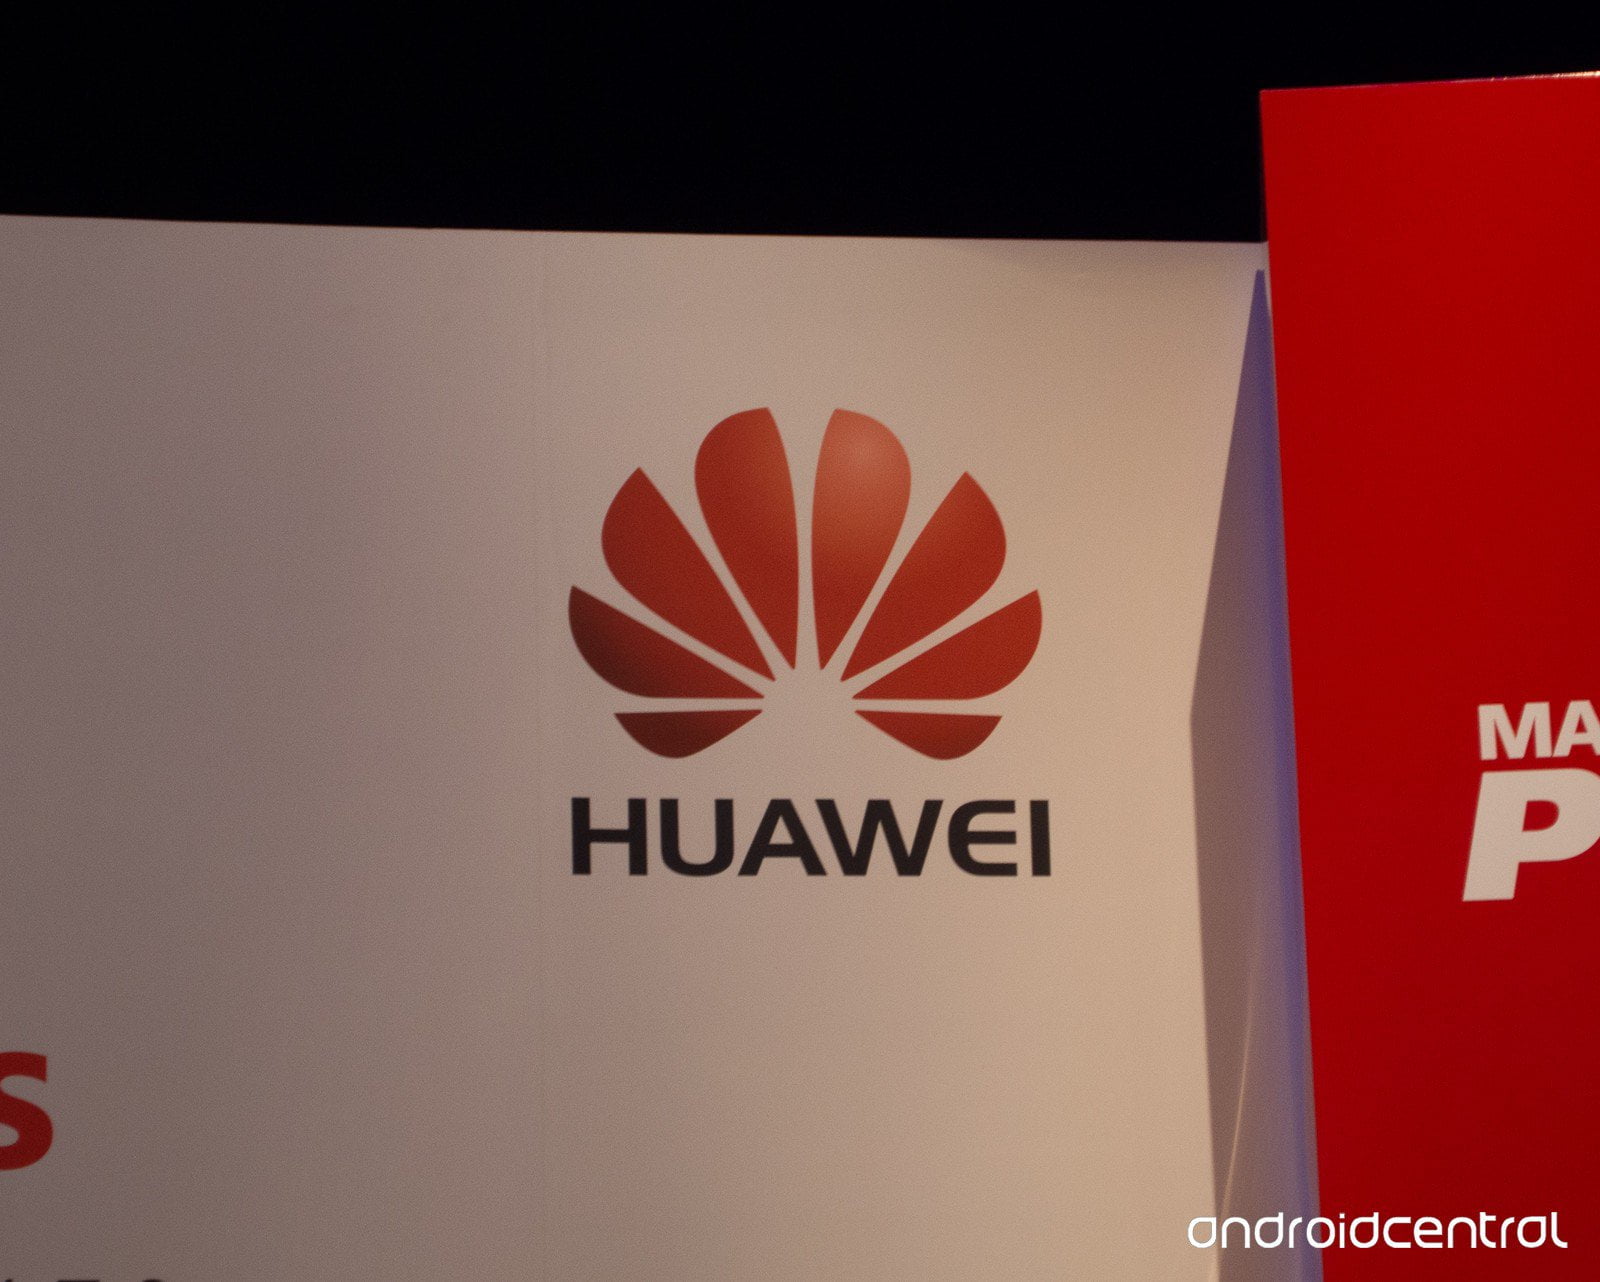 Boxed in by tech and law, how can Huawei keep its Android update promise?